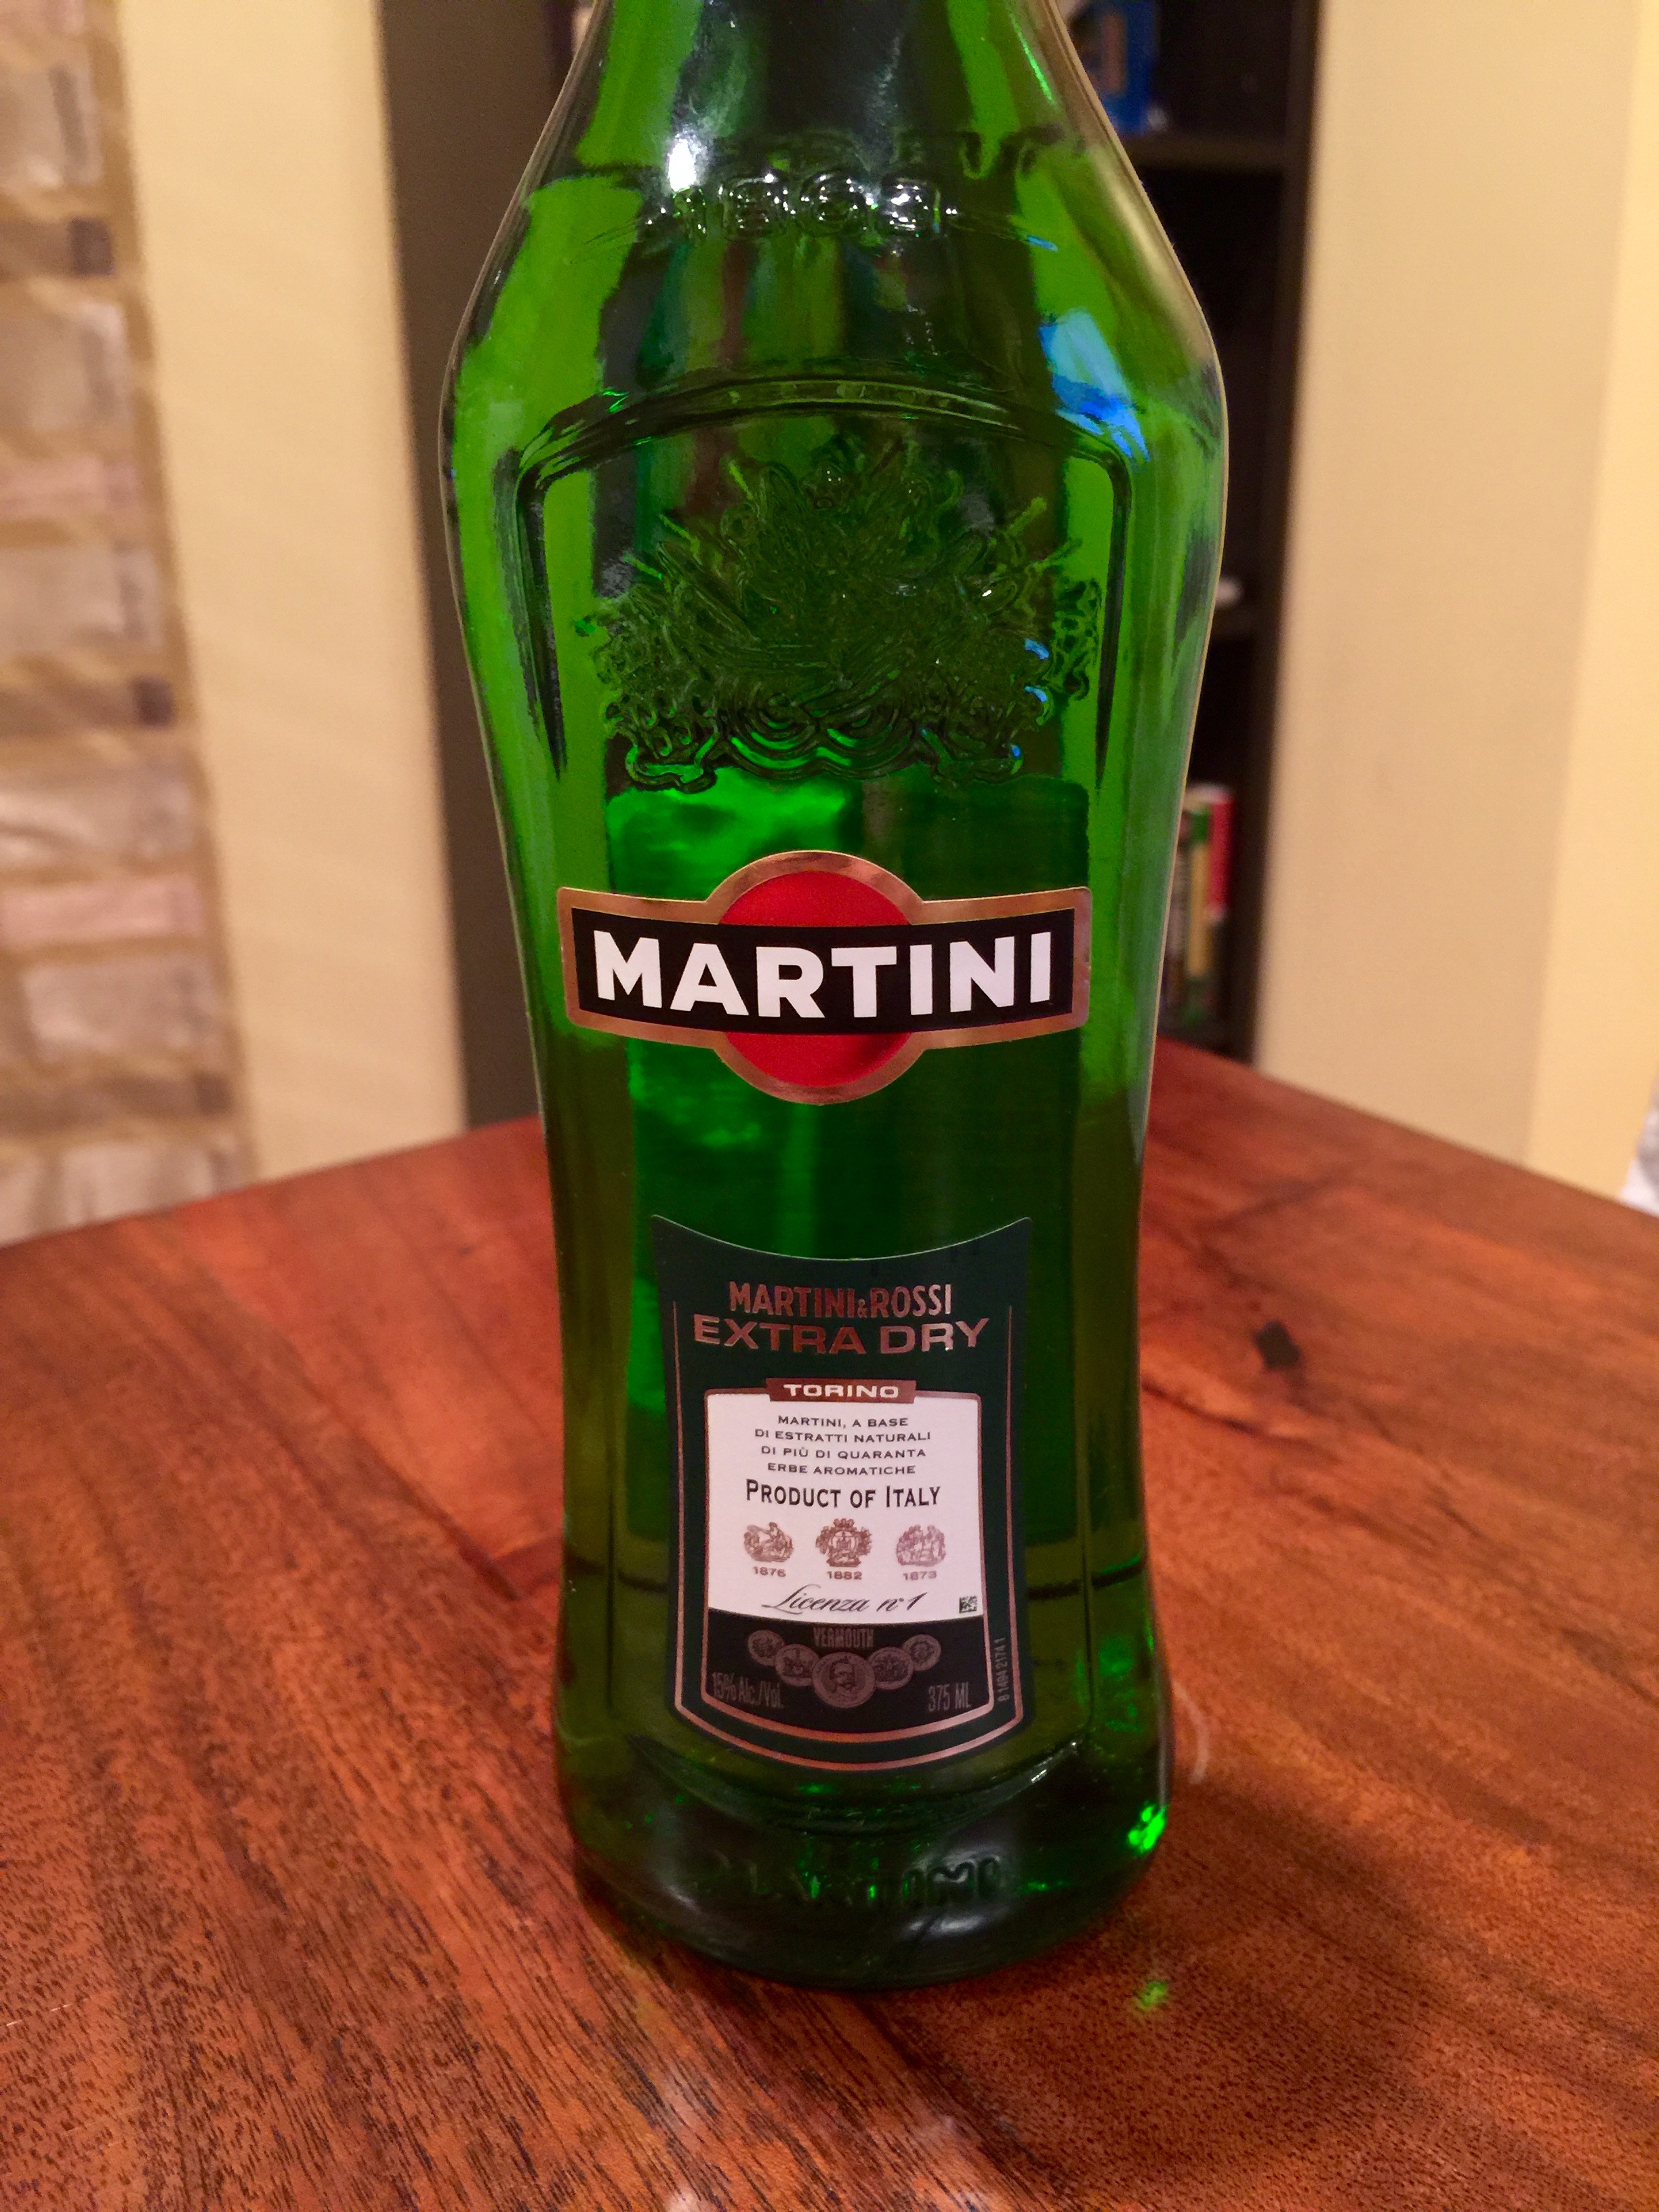 martini-and-rossi-extra-dry-vermouth-first-pour-wine-erofound